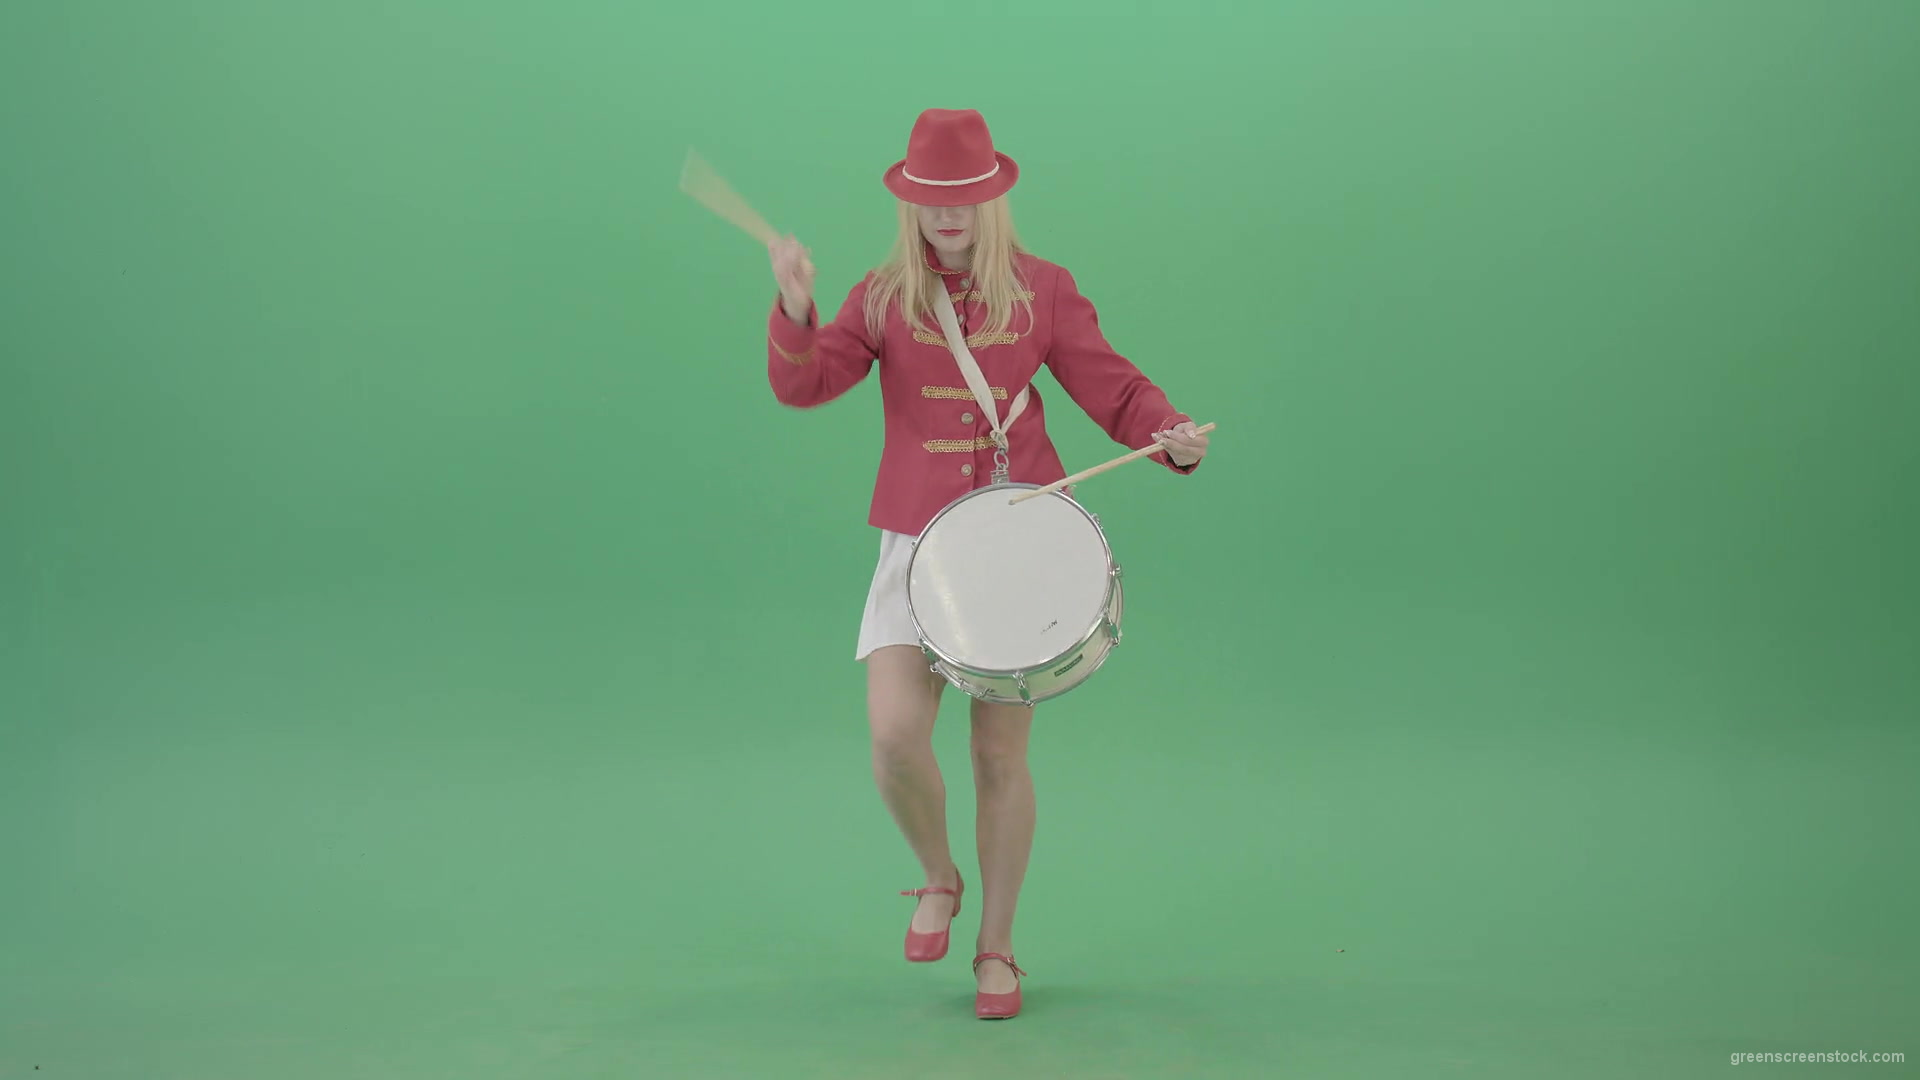 Girl-in-red-dress-marching-and-playing-drum-snare-music-instrument-over-green-screen-4K-Video-Footage-1920_007 Green Screen Stock